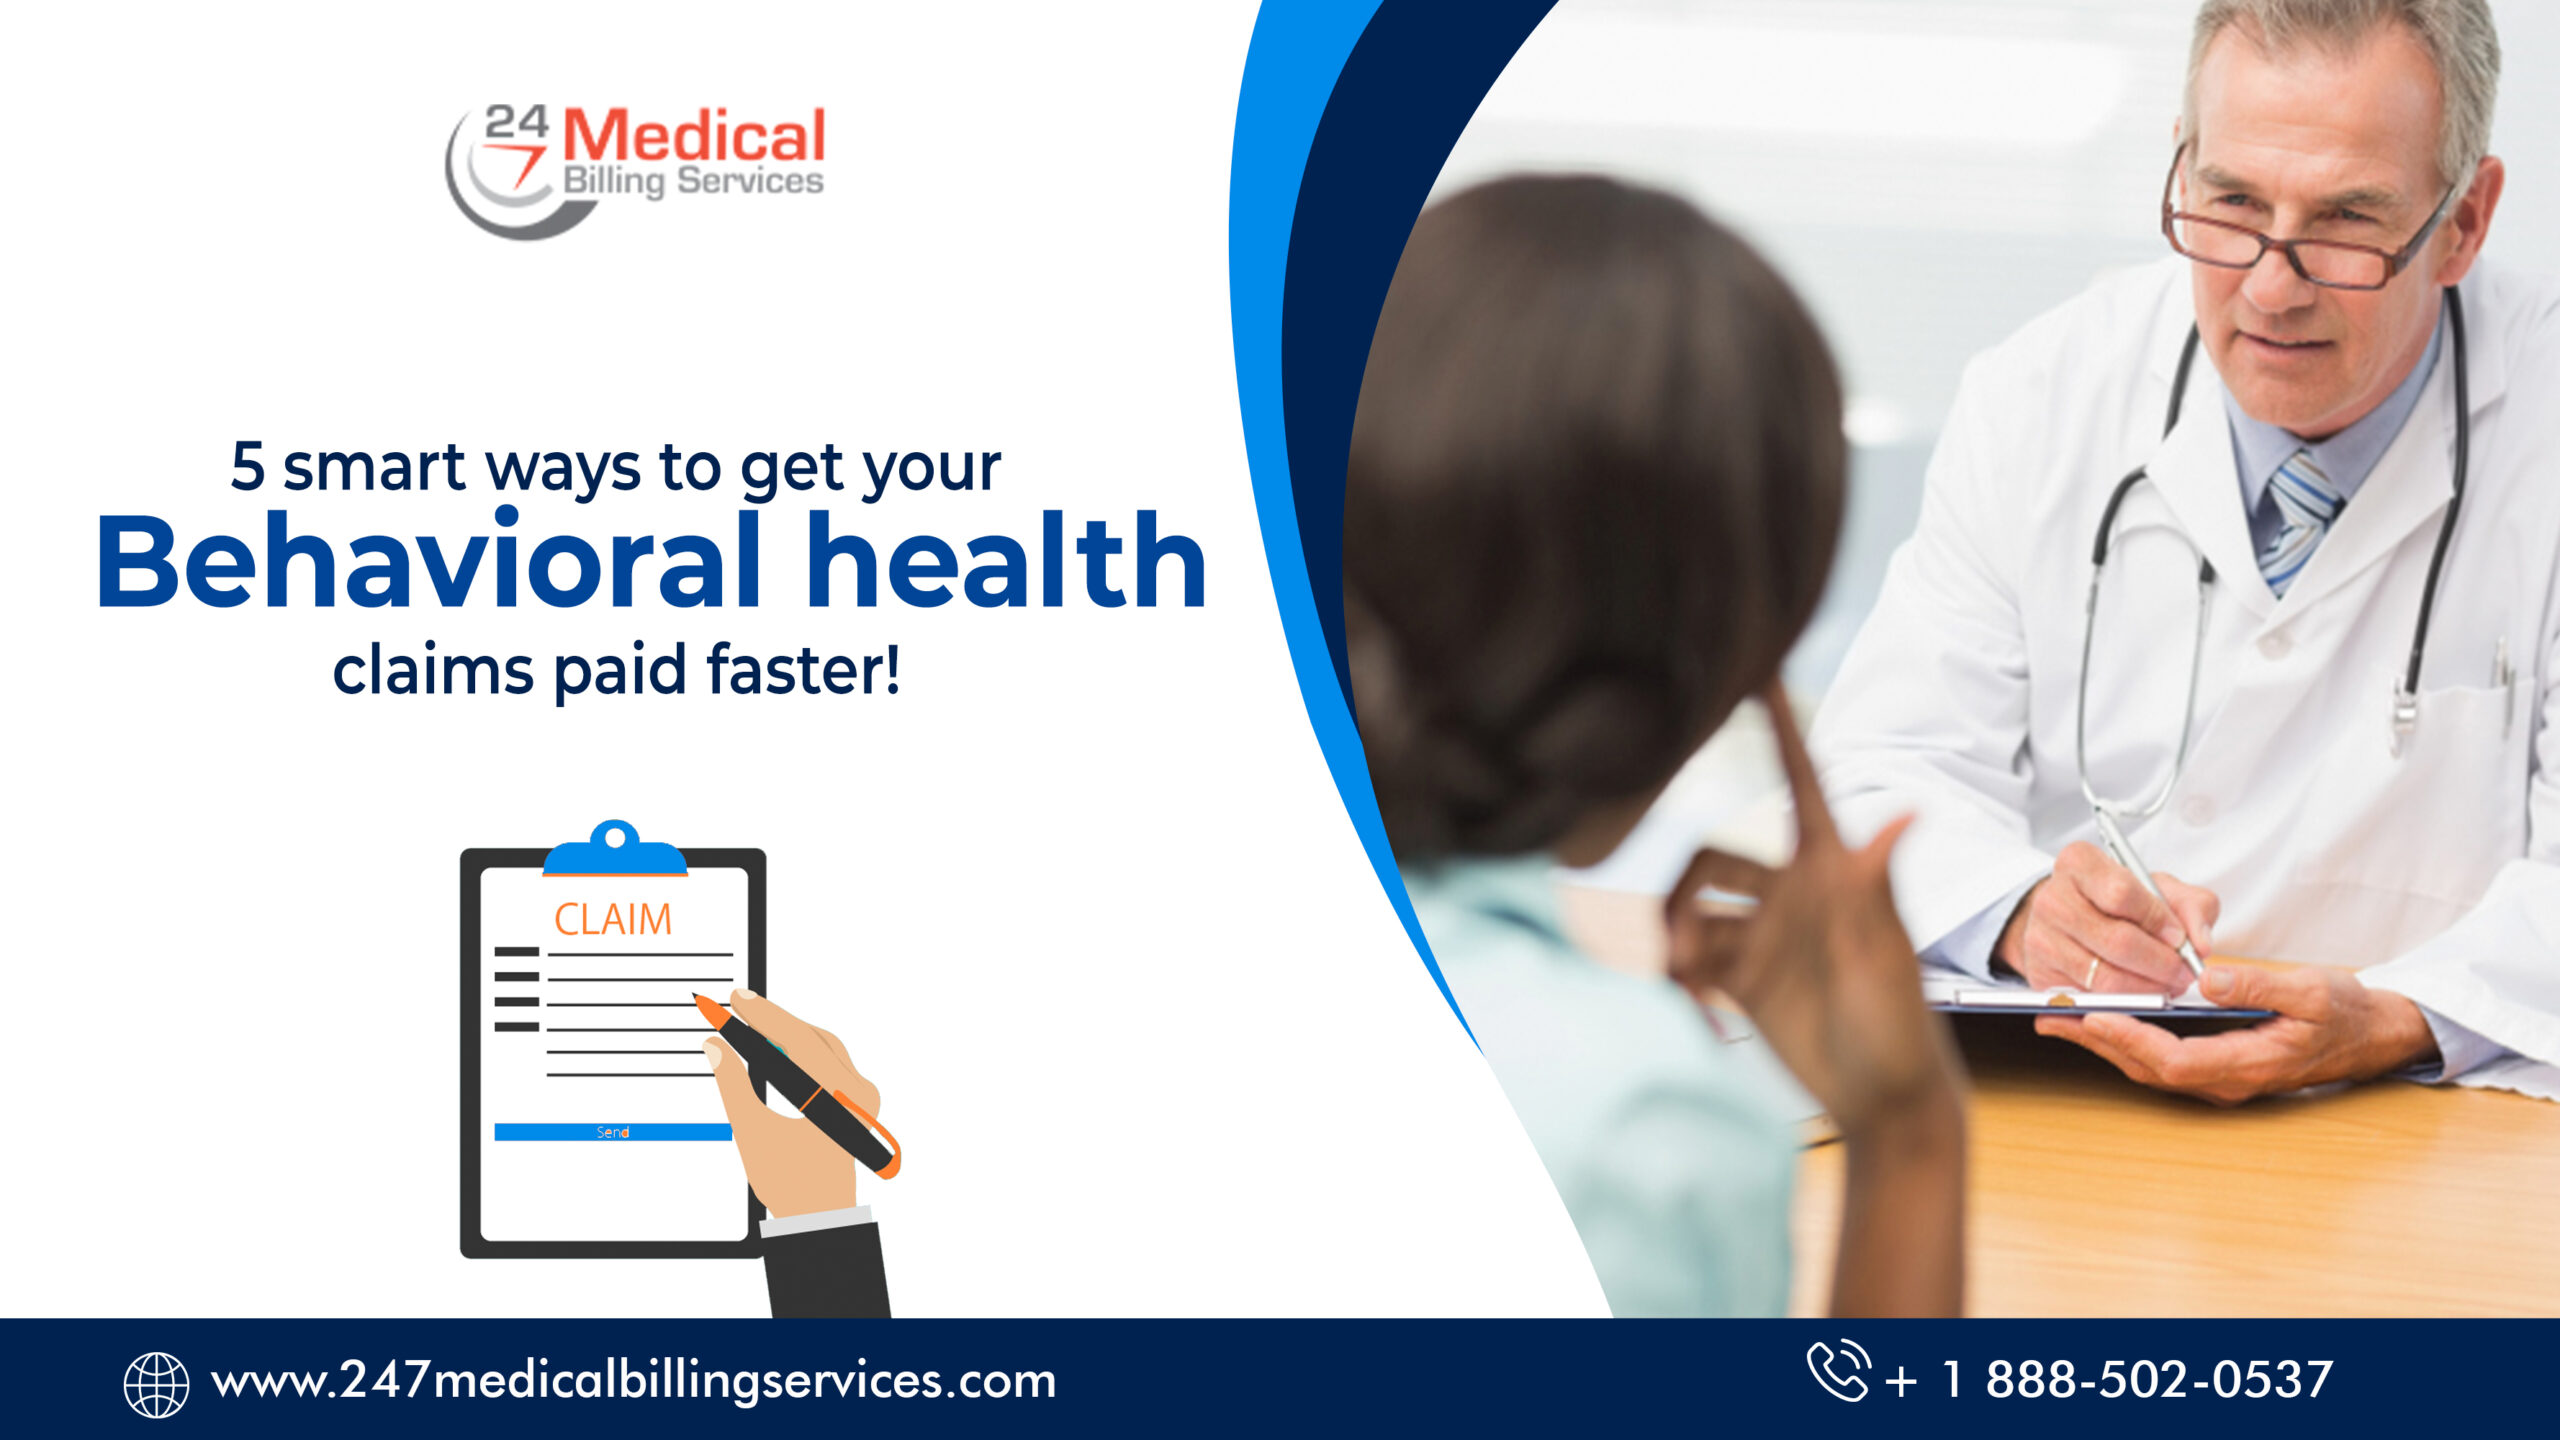  5 Smart Ways to get your Behavioral Health Claims Paid Faster!